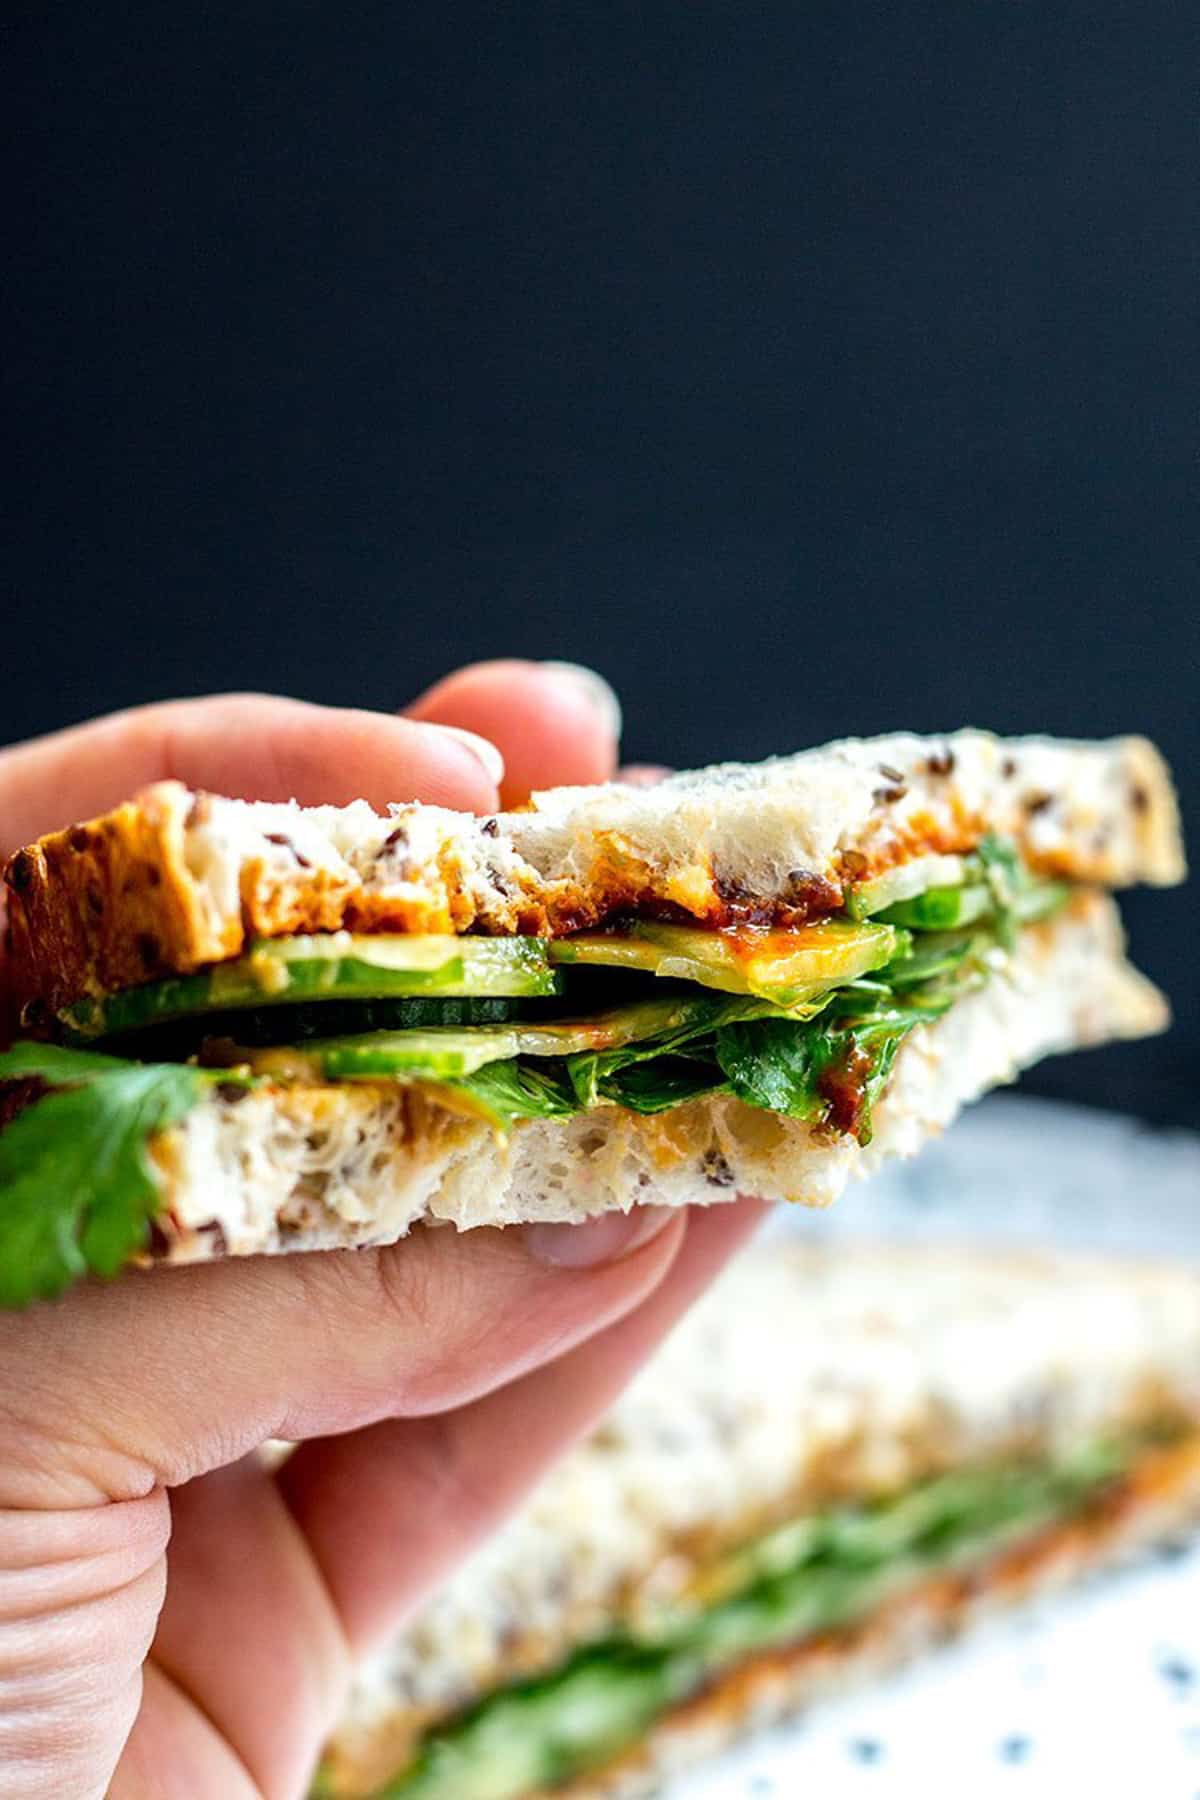 hand holding a sandwich with cucumber, cilantro, and sauce inside.